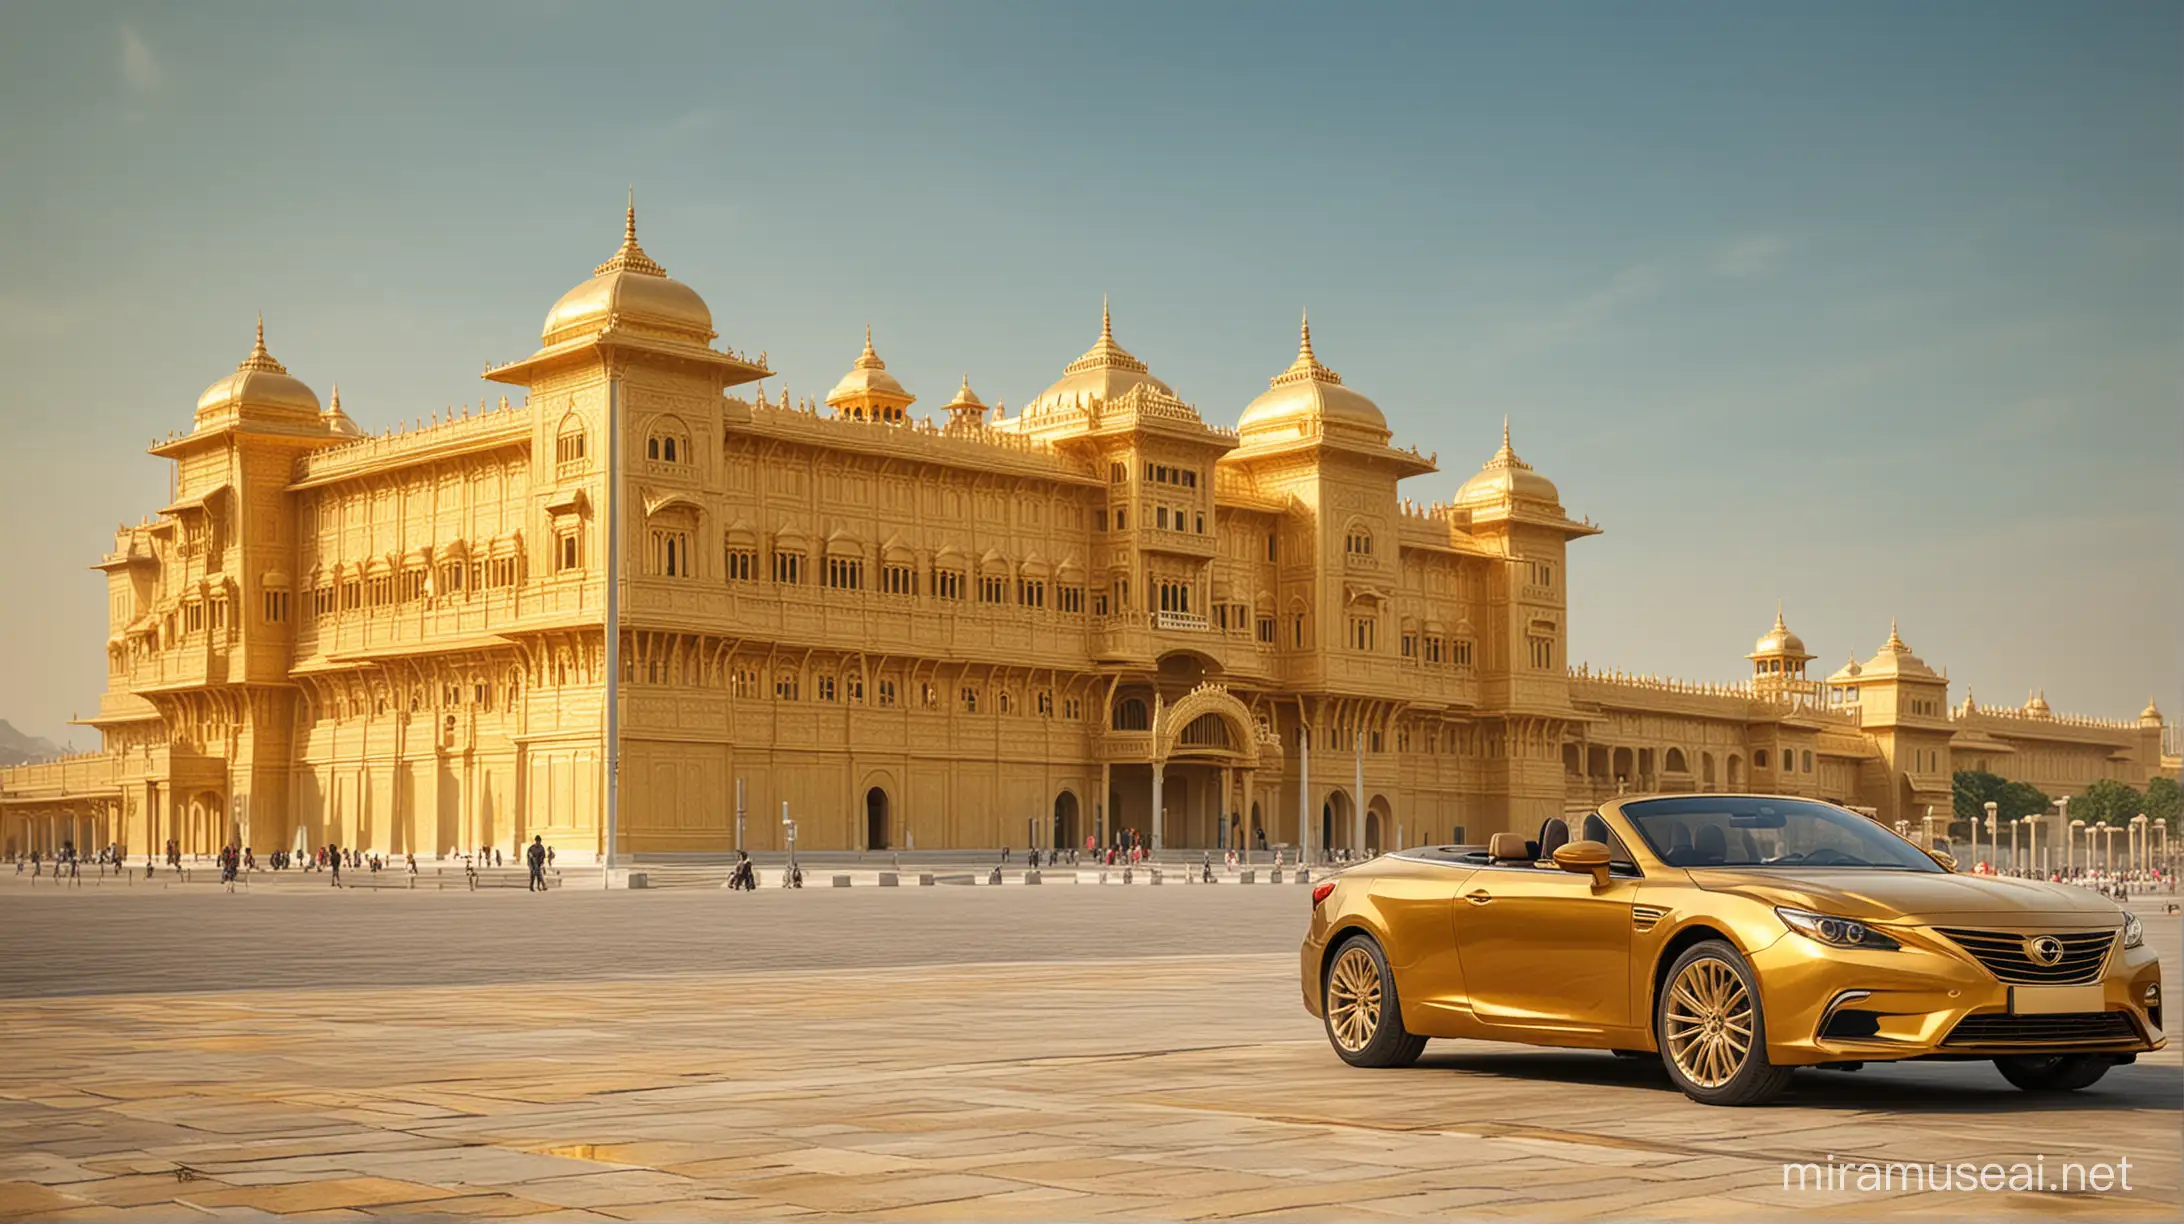 Golden Palace with Luxurious Golden Car Parked Outside